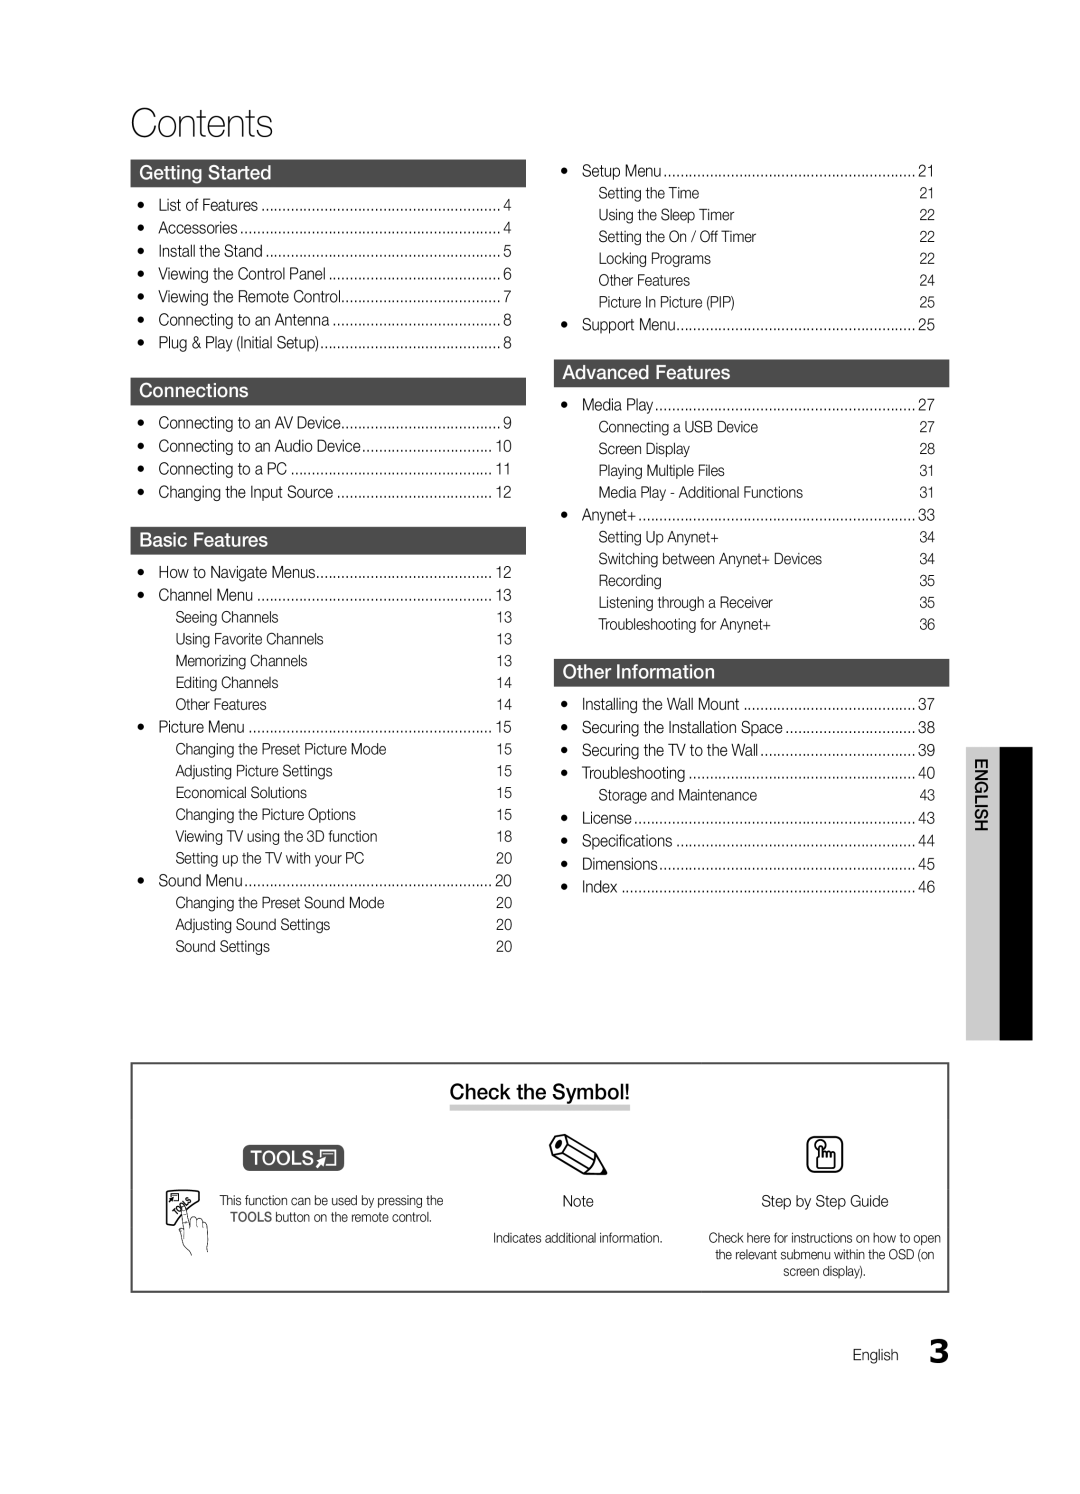 Samsung PC490-ZA user manual Contents, Check the Symbol, Getting Started, Connections, Basic Features, Advanced Features 